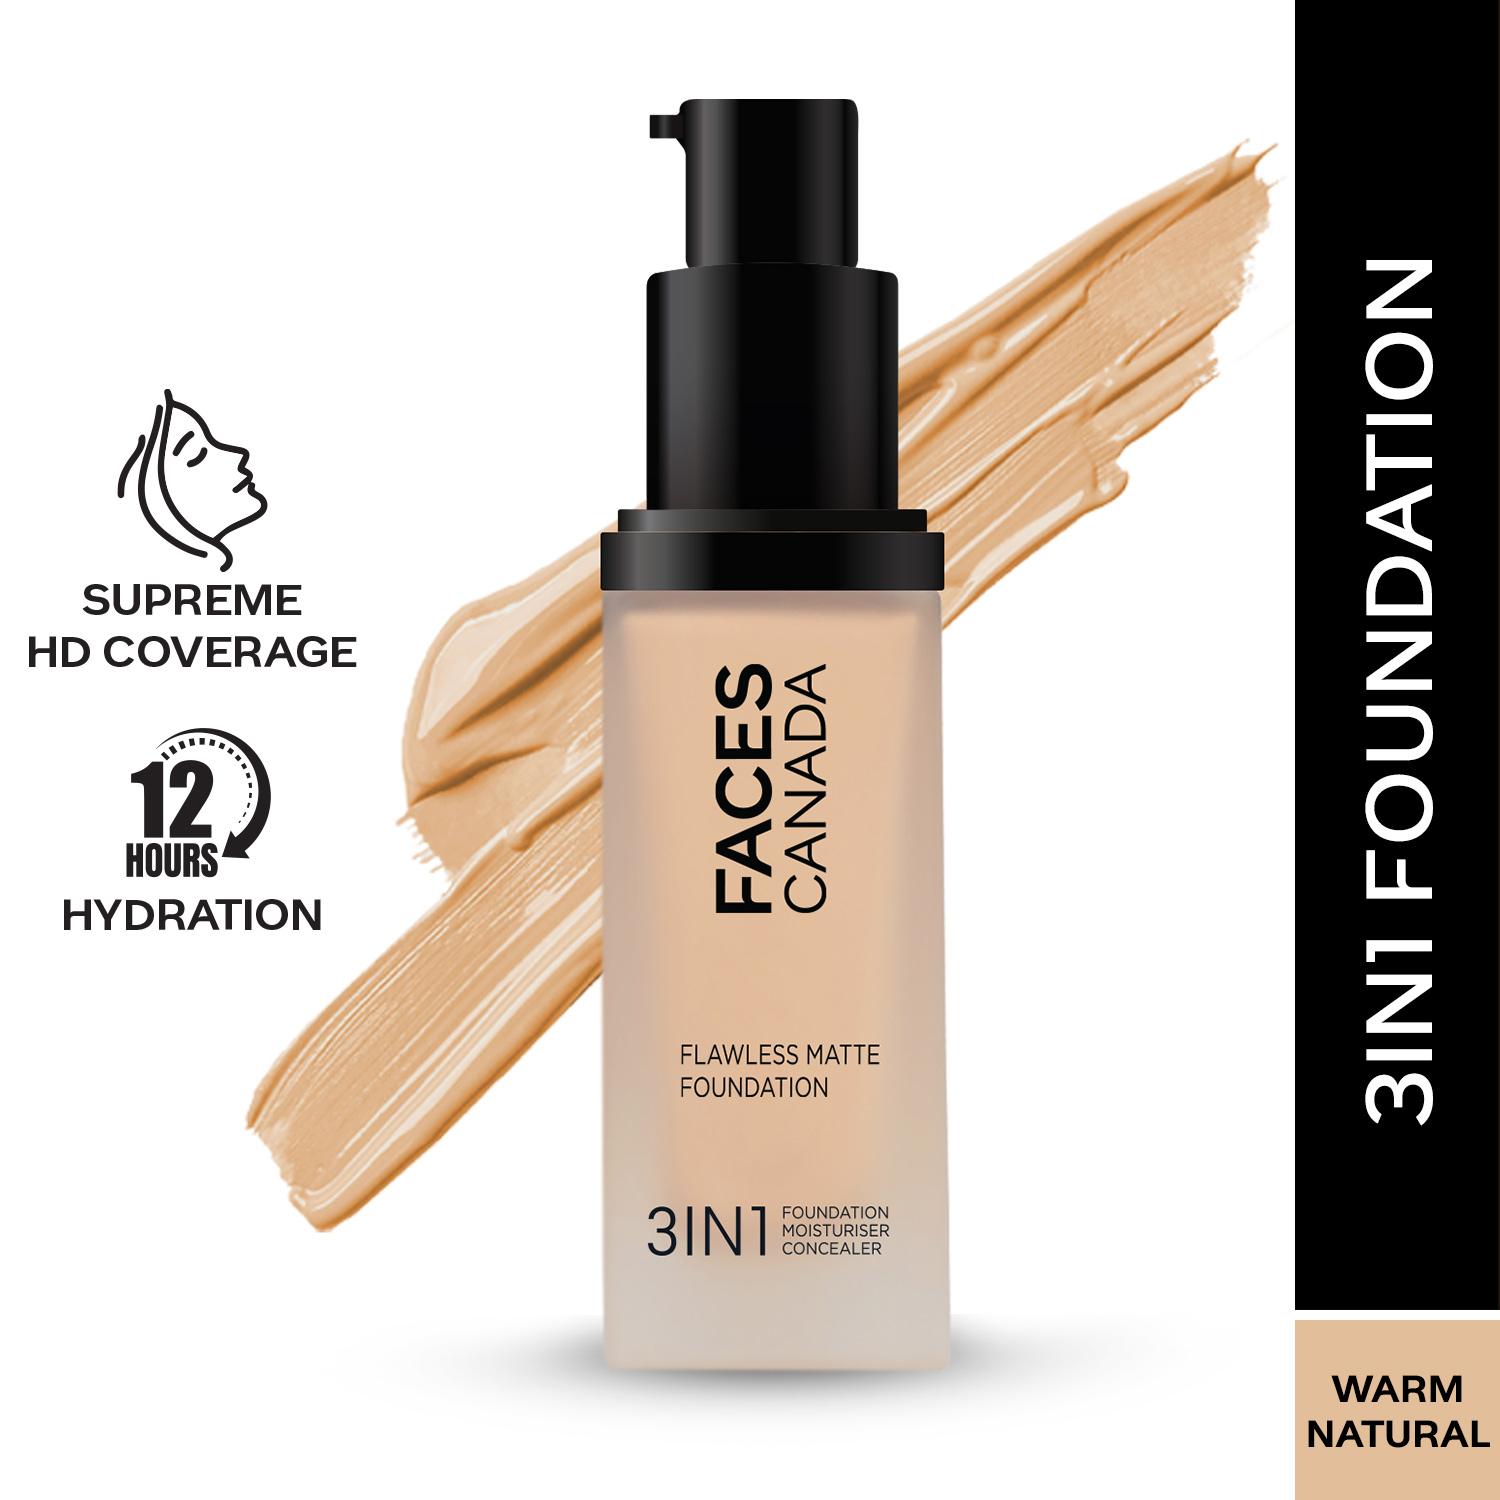 Faces Canada | Faces Canada 3-In-1 Flawless Matte Foundation SPF 18 - 021 Warm Natural (30ml)